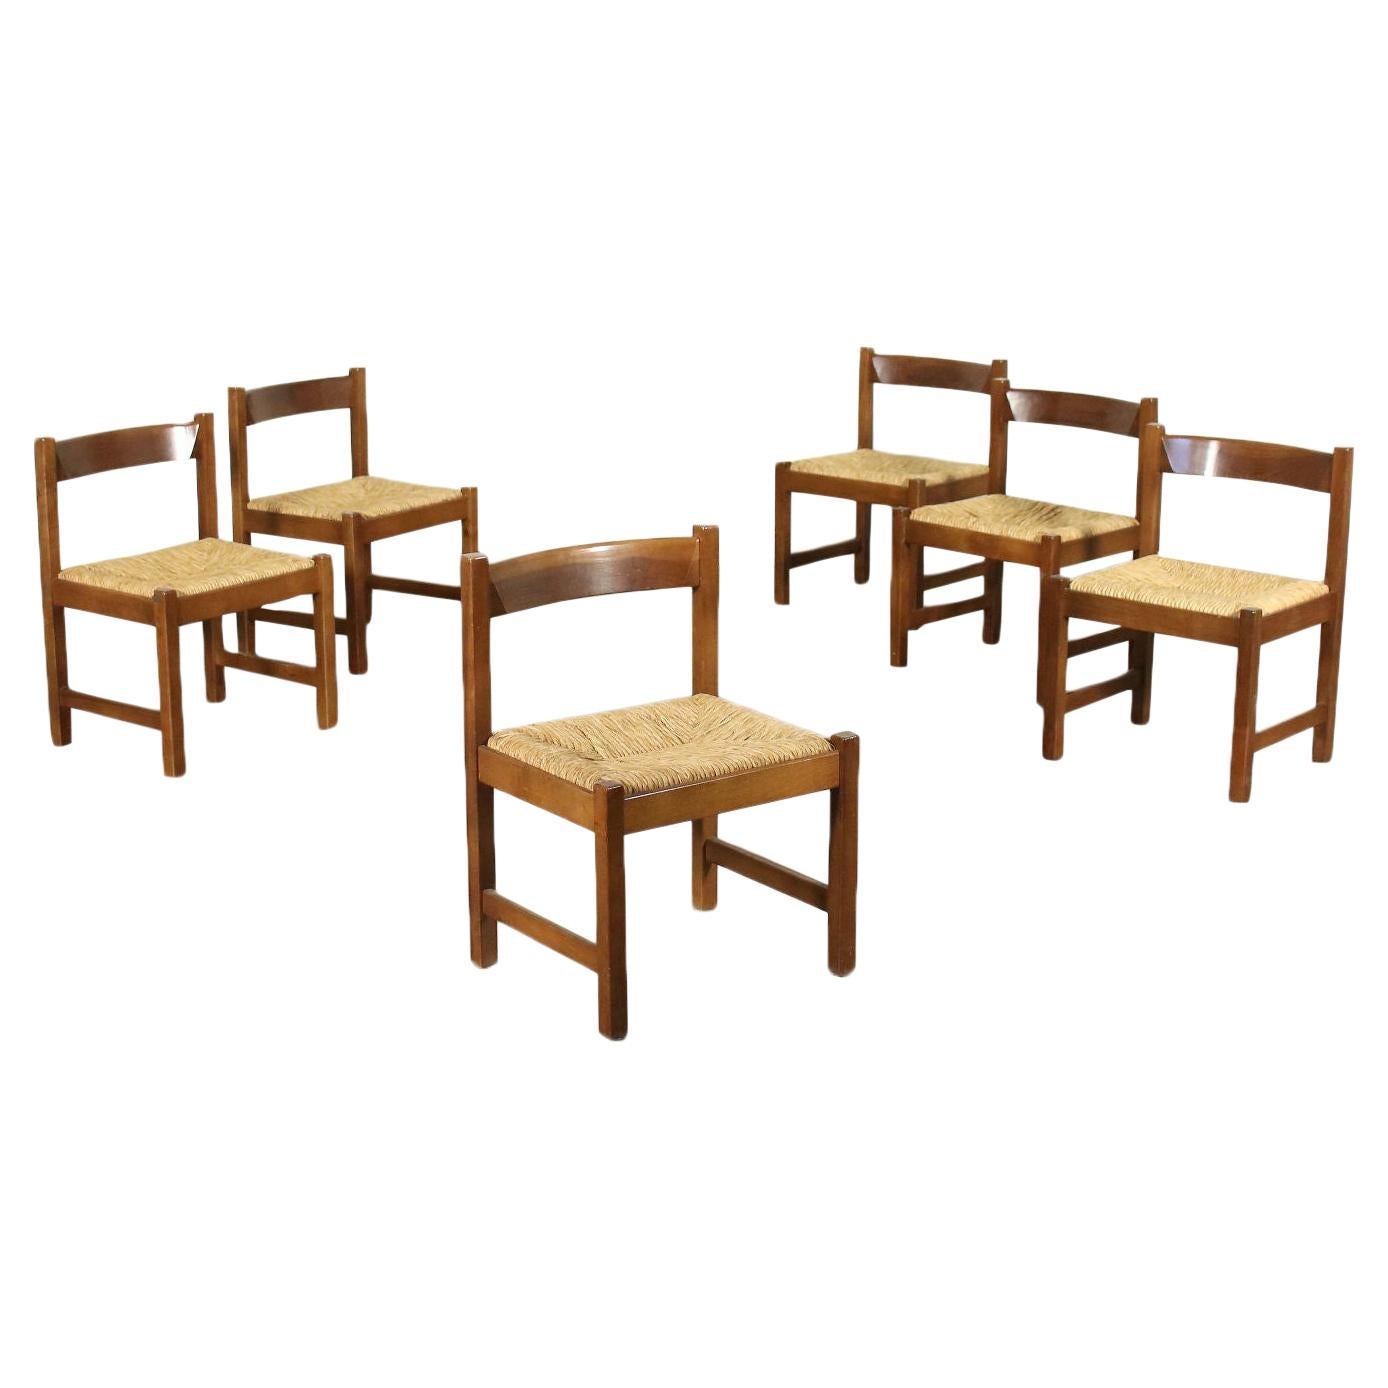 Group of Six Chairs Giovanni Michelucci Beech Raffia 1960s-1970s